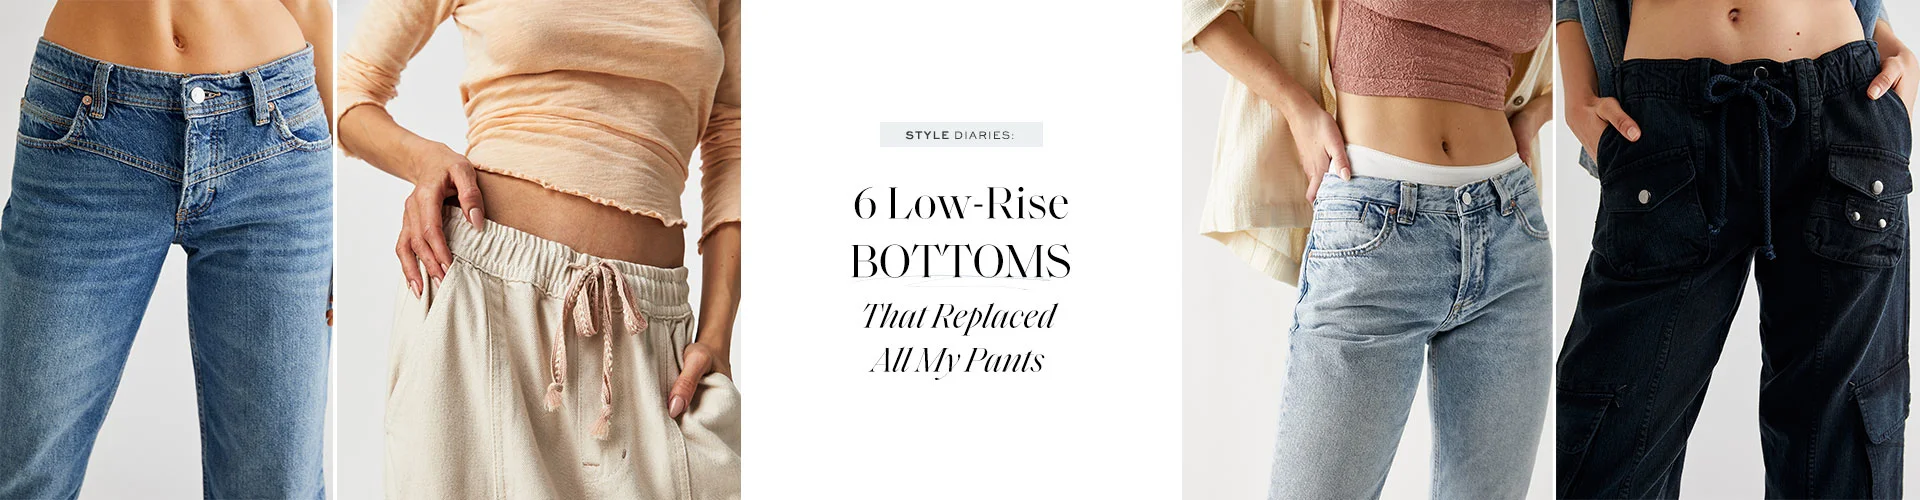 FP's Guide to Low-Rise Pants Styles